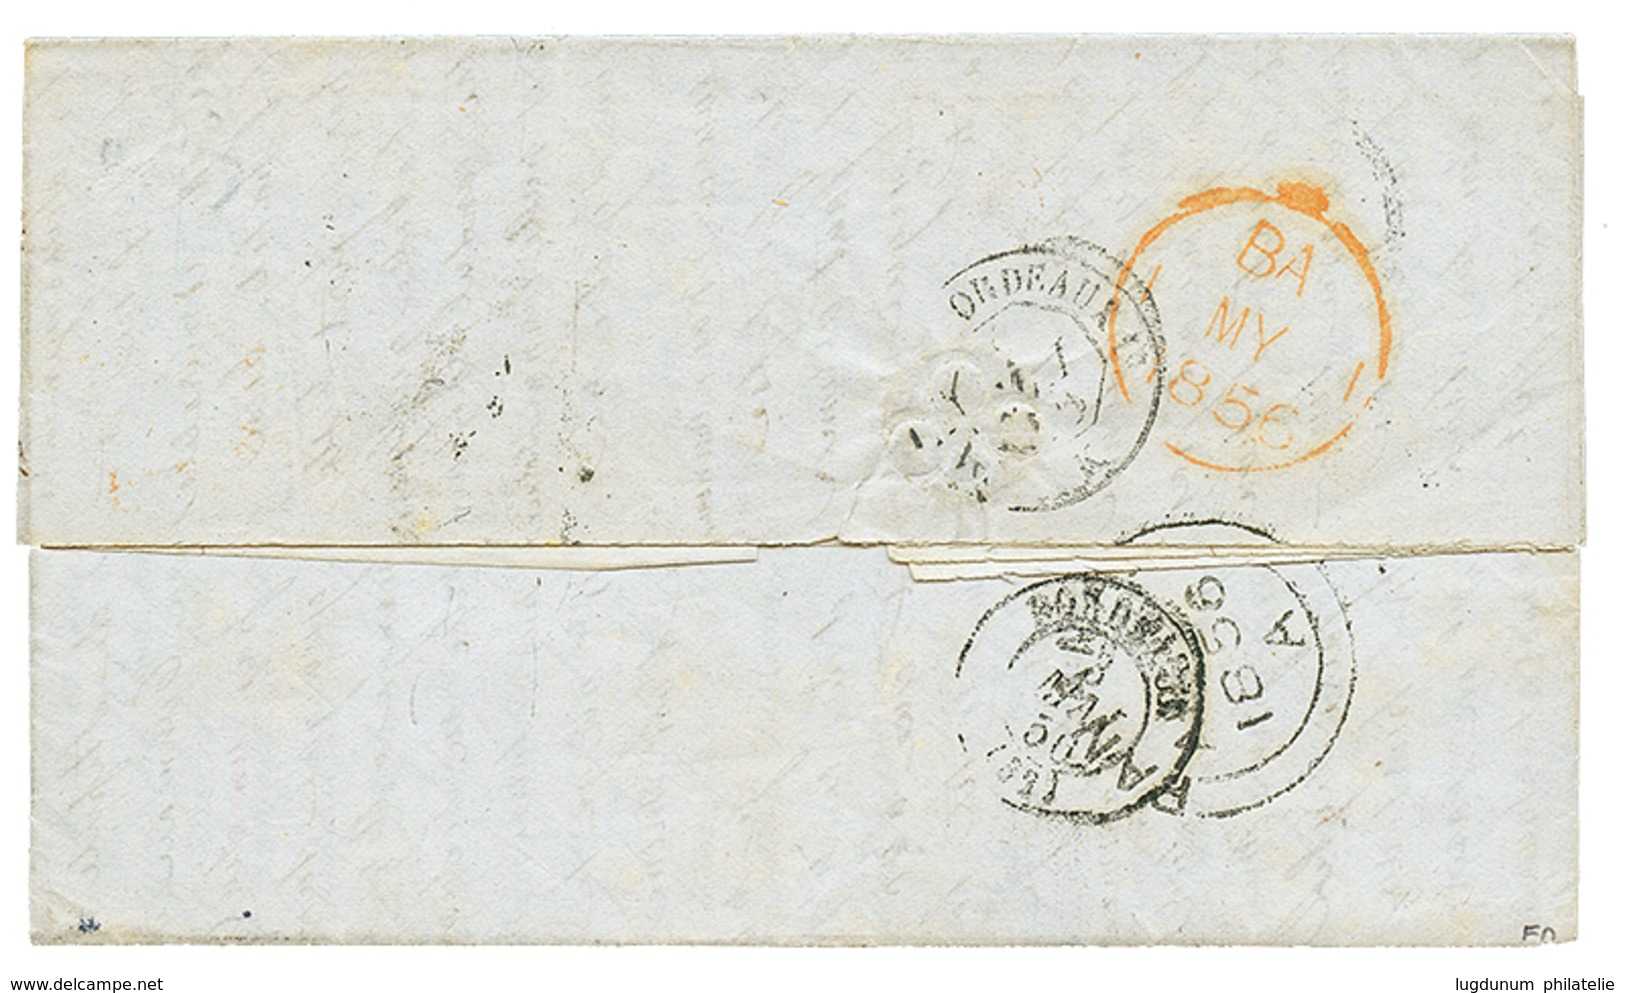 PANAMA : 1856 Rare Exchange Marking COLONIES ART-18 In Red On Entire Letter Datelined "PANAMA" To FRANCE. Vvf. - Panama